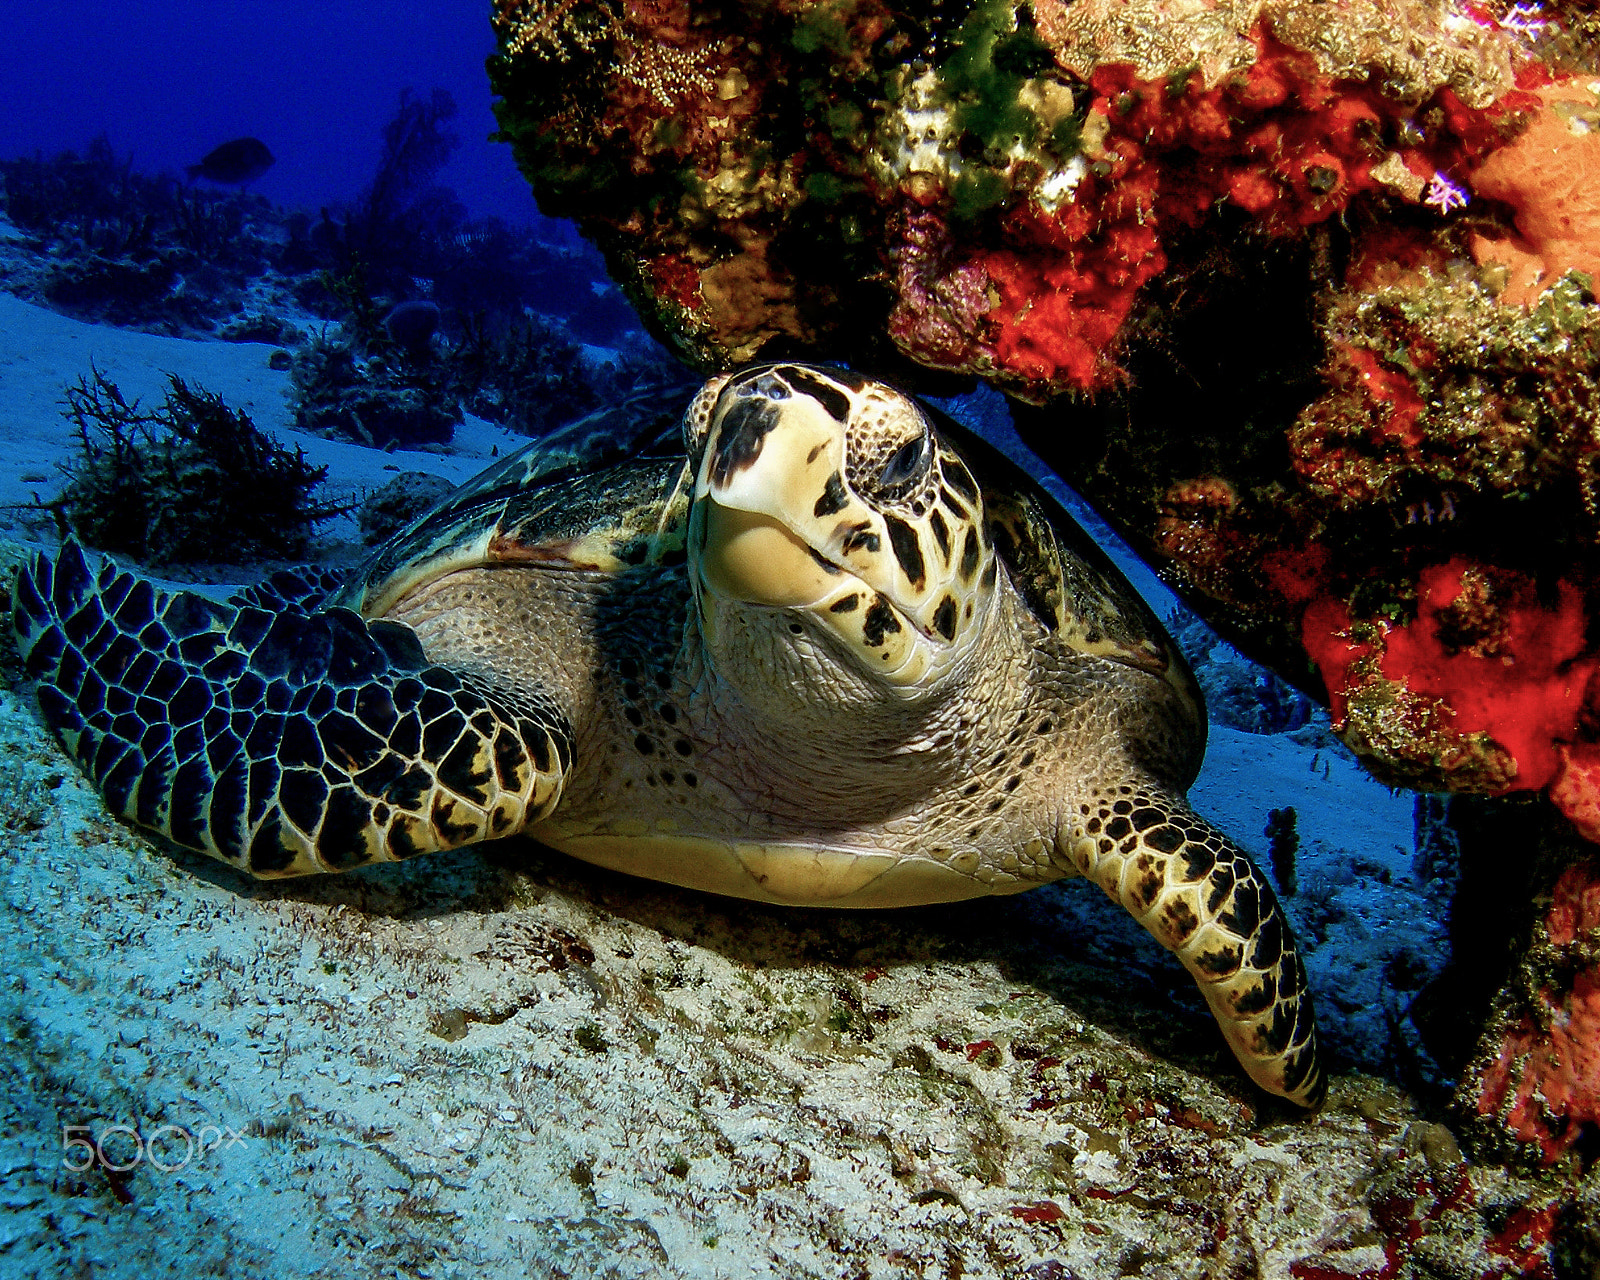 Olympus SP350 sample photo. Hawksbill turtle under a ledge photography